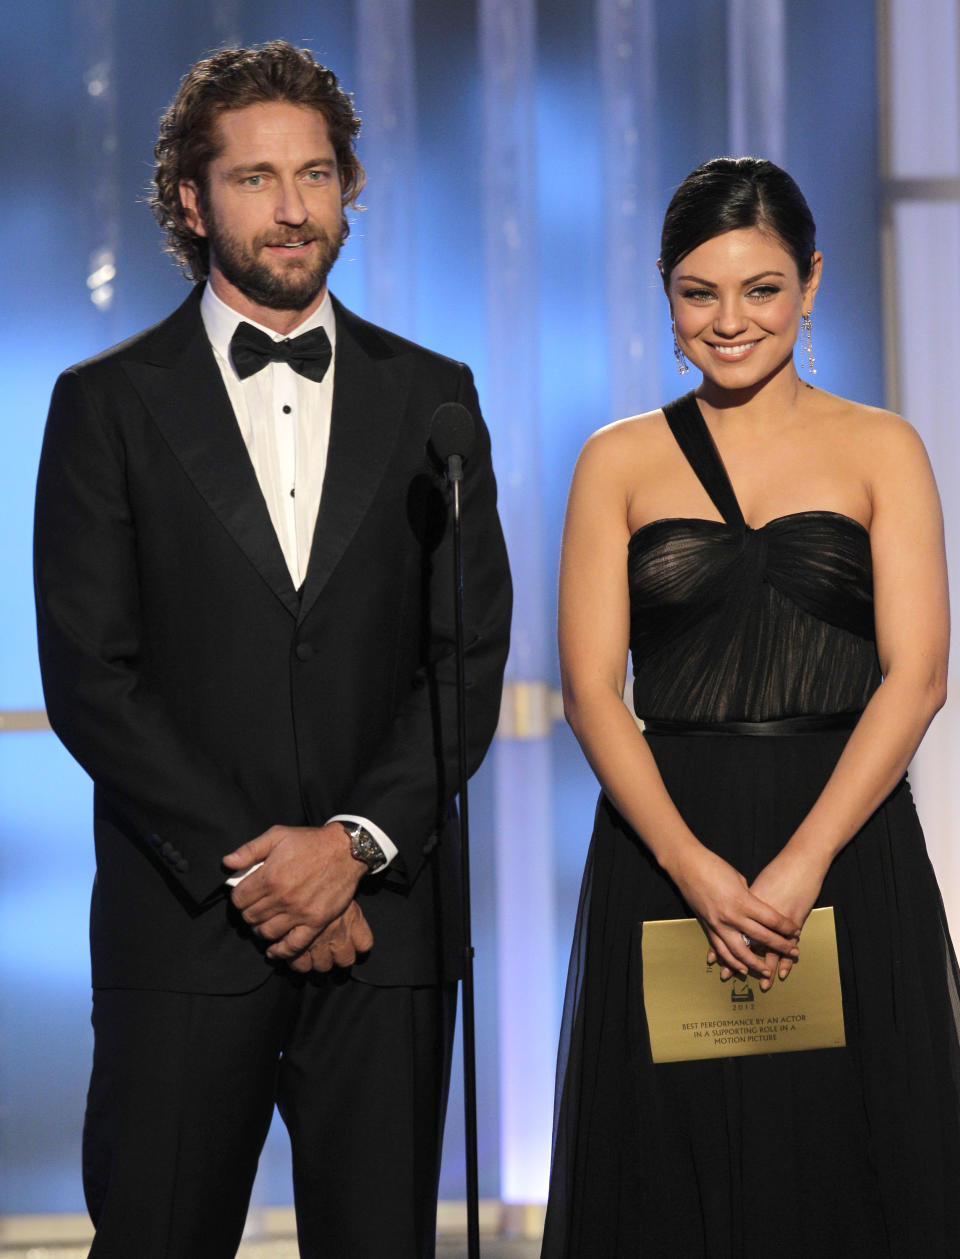 69th Annual Golden Globes Awards - Show